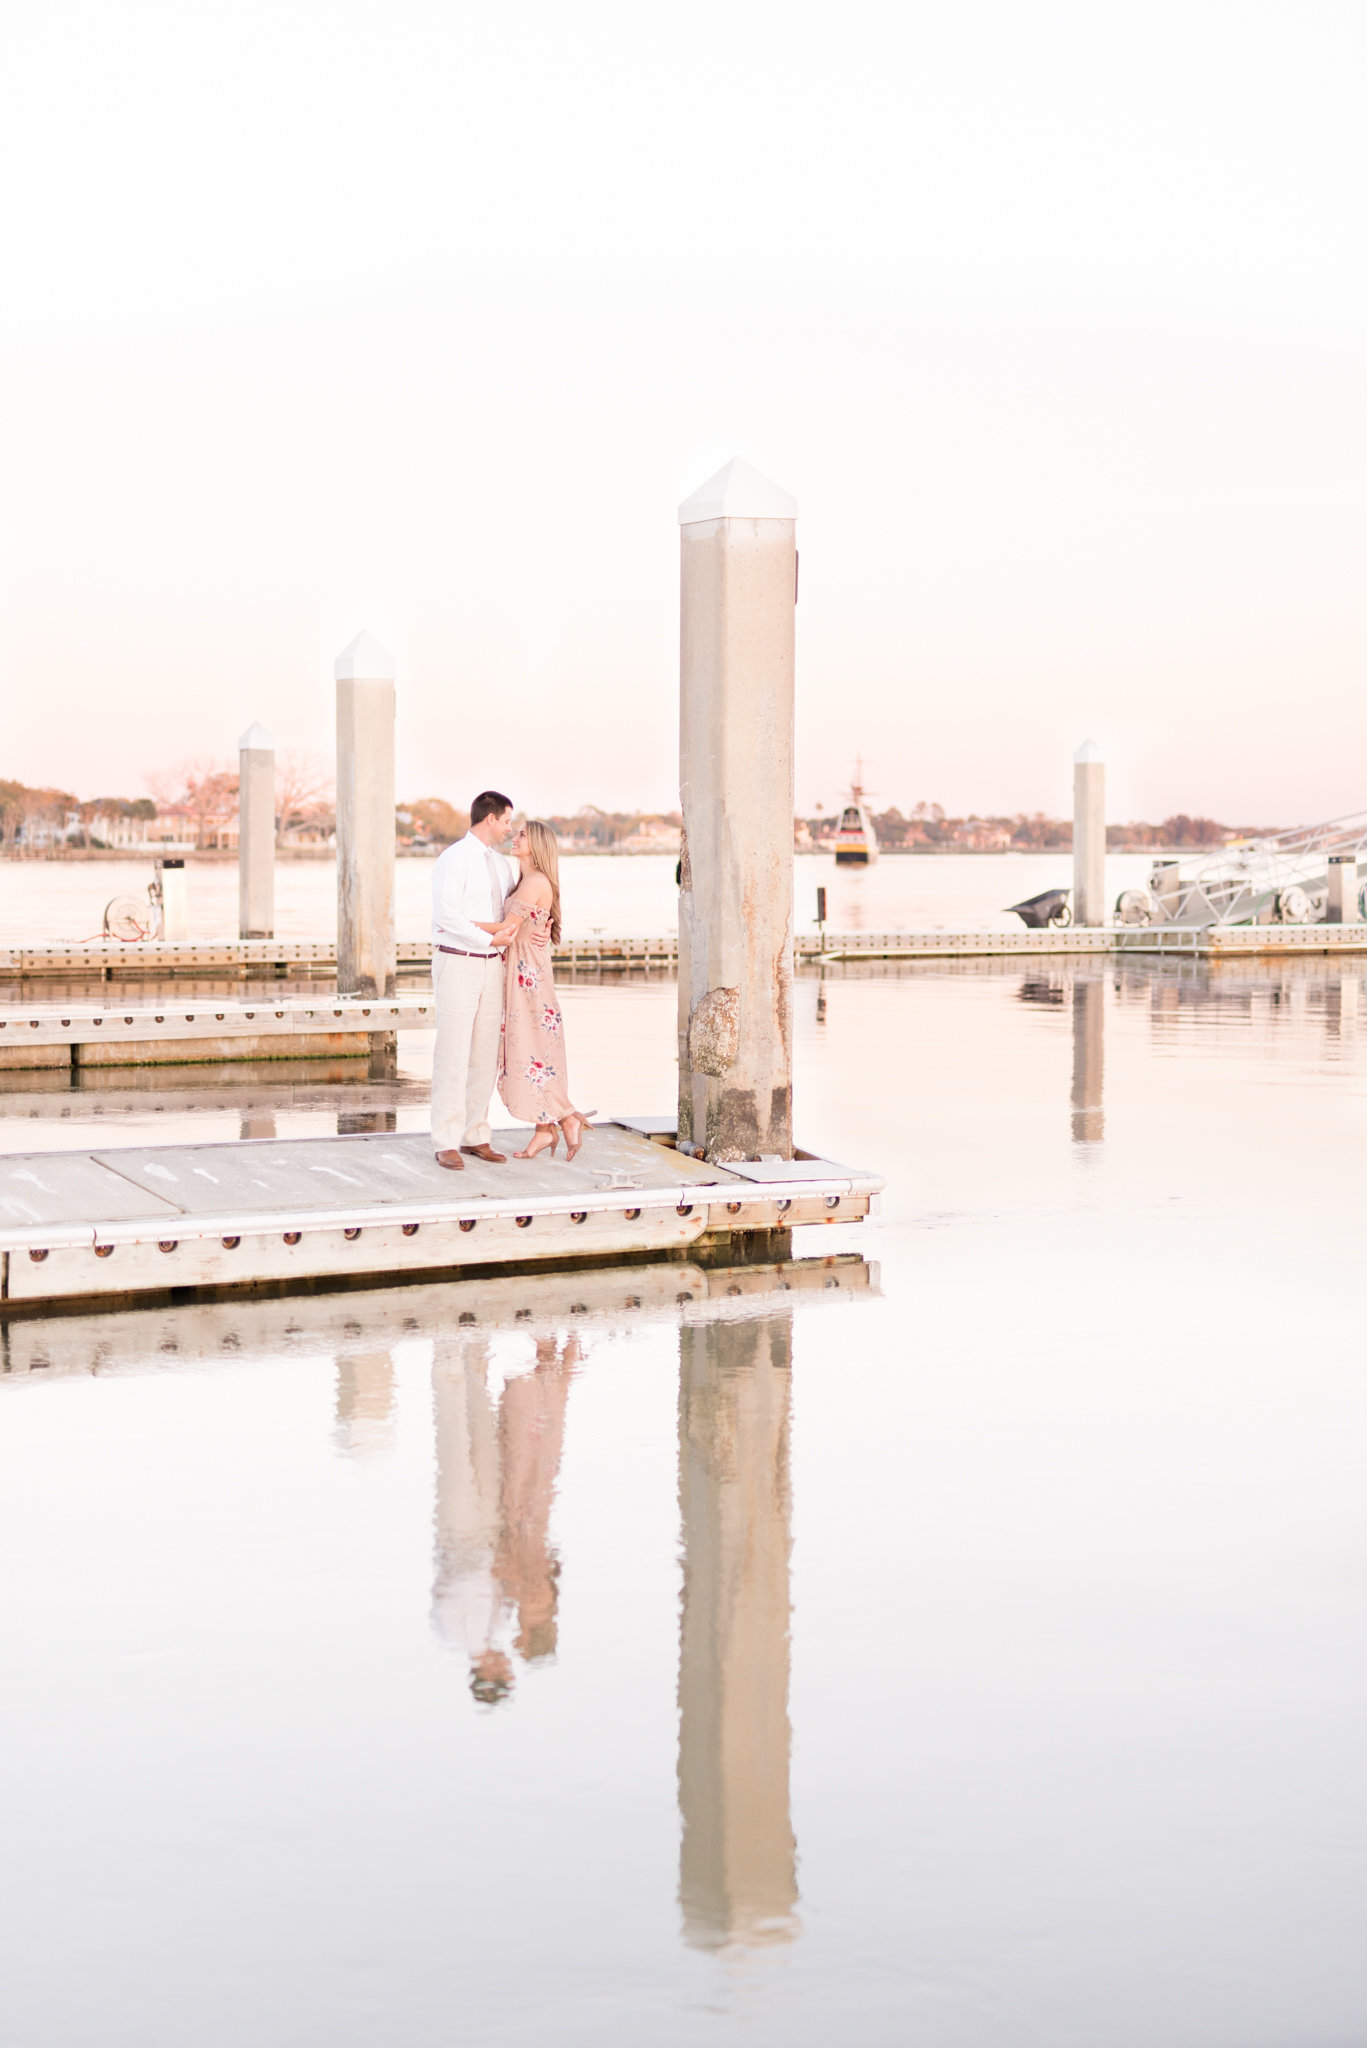 Man and woman stand on dock at sunset.